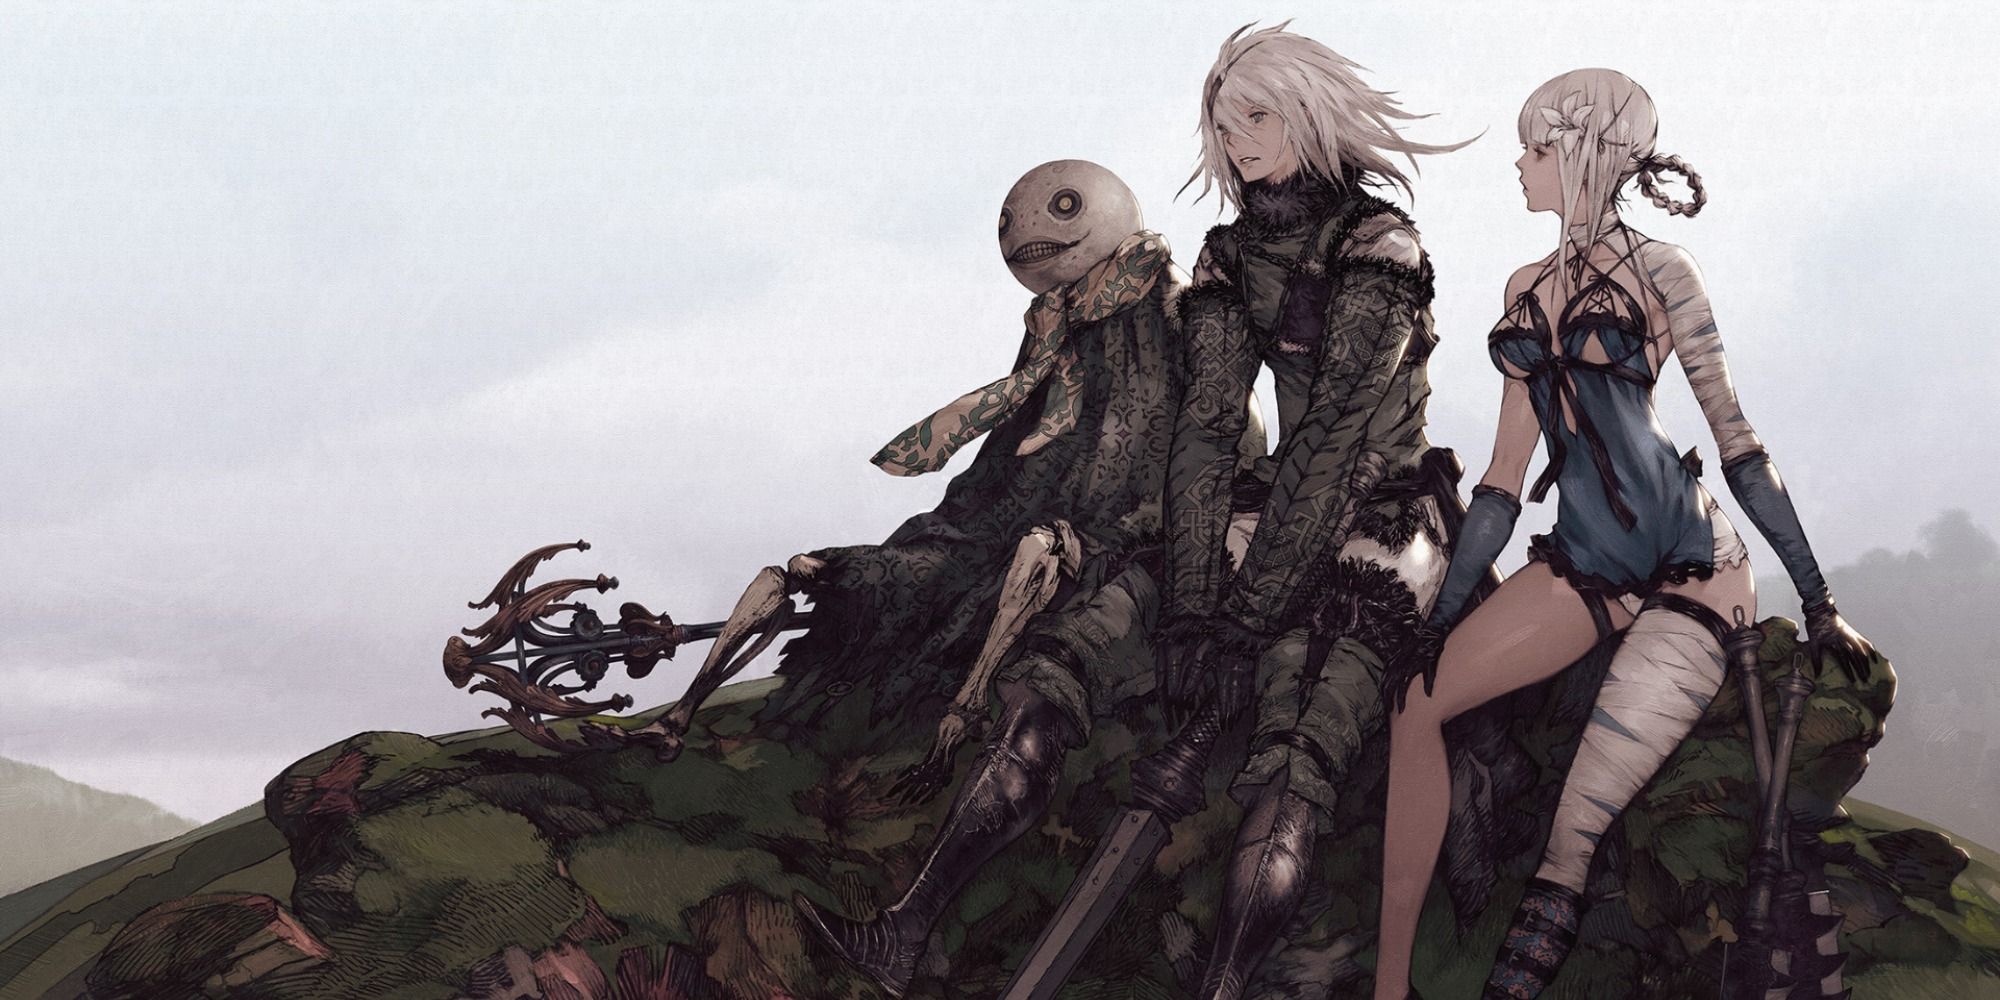 Key art showing the main cast of NieR Replicant